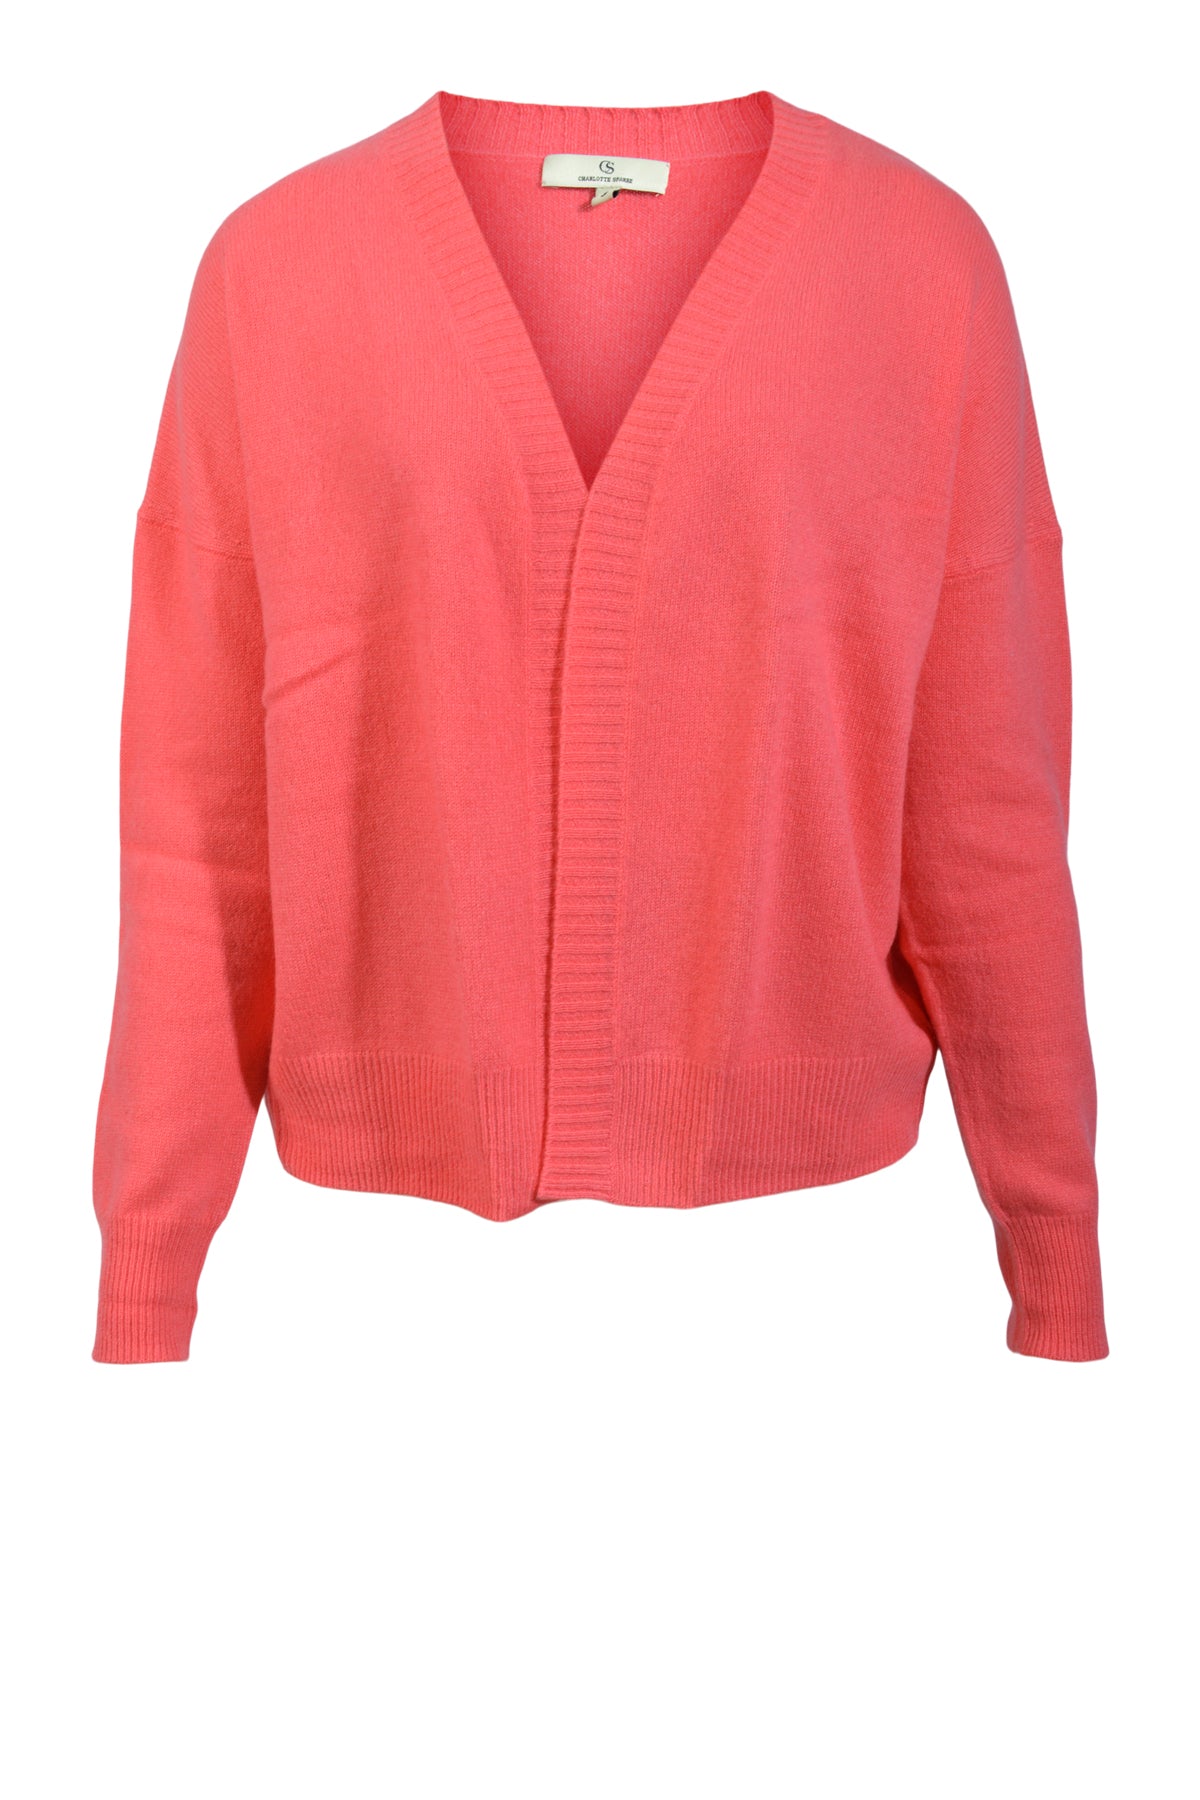 Charlotte Sparre Cashmere cardigan 2345, Solid Red